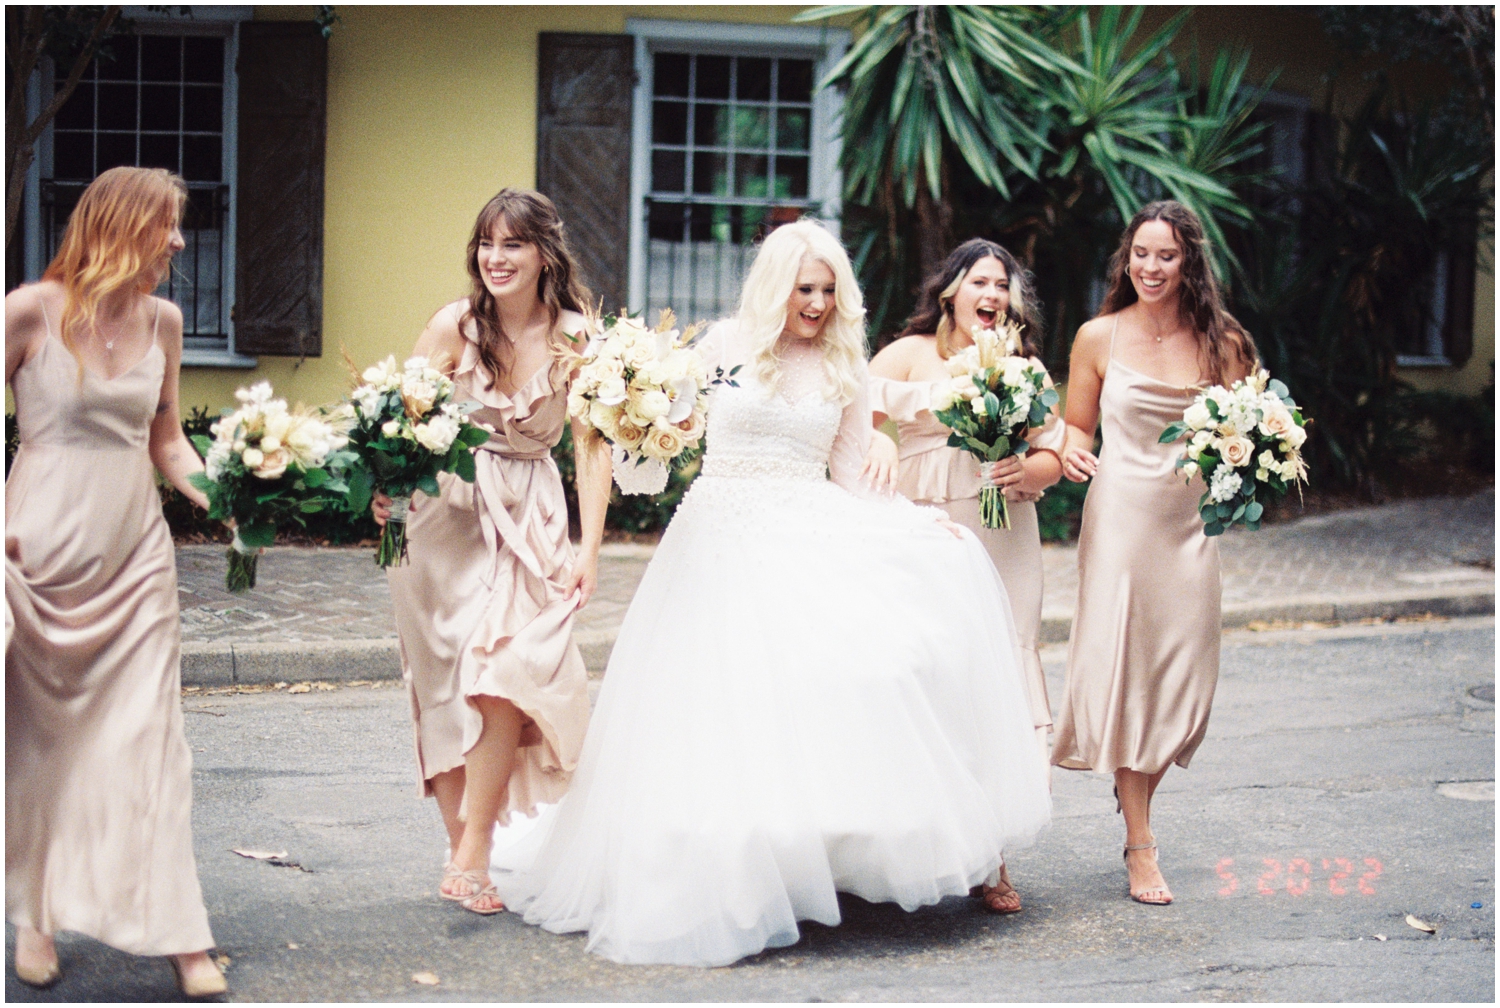 A bride and her wedding party cross a street in front of a yellow house.